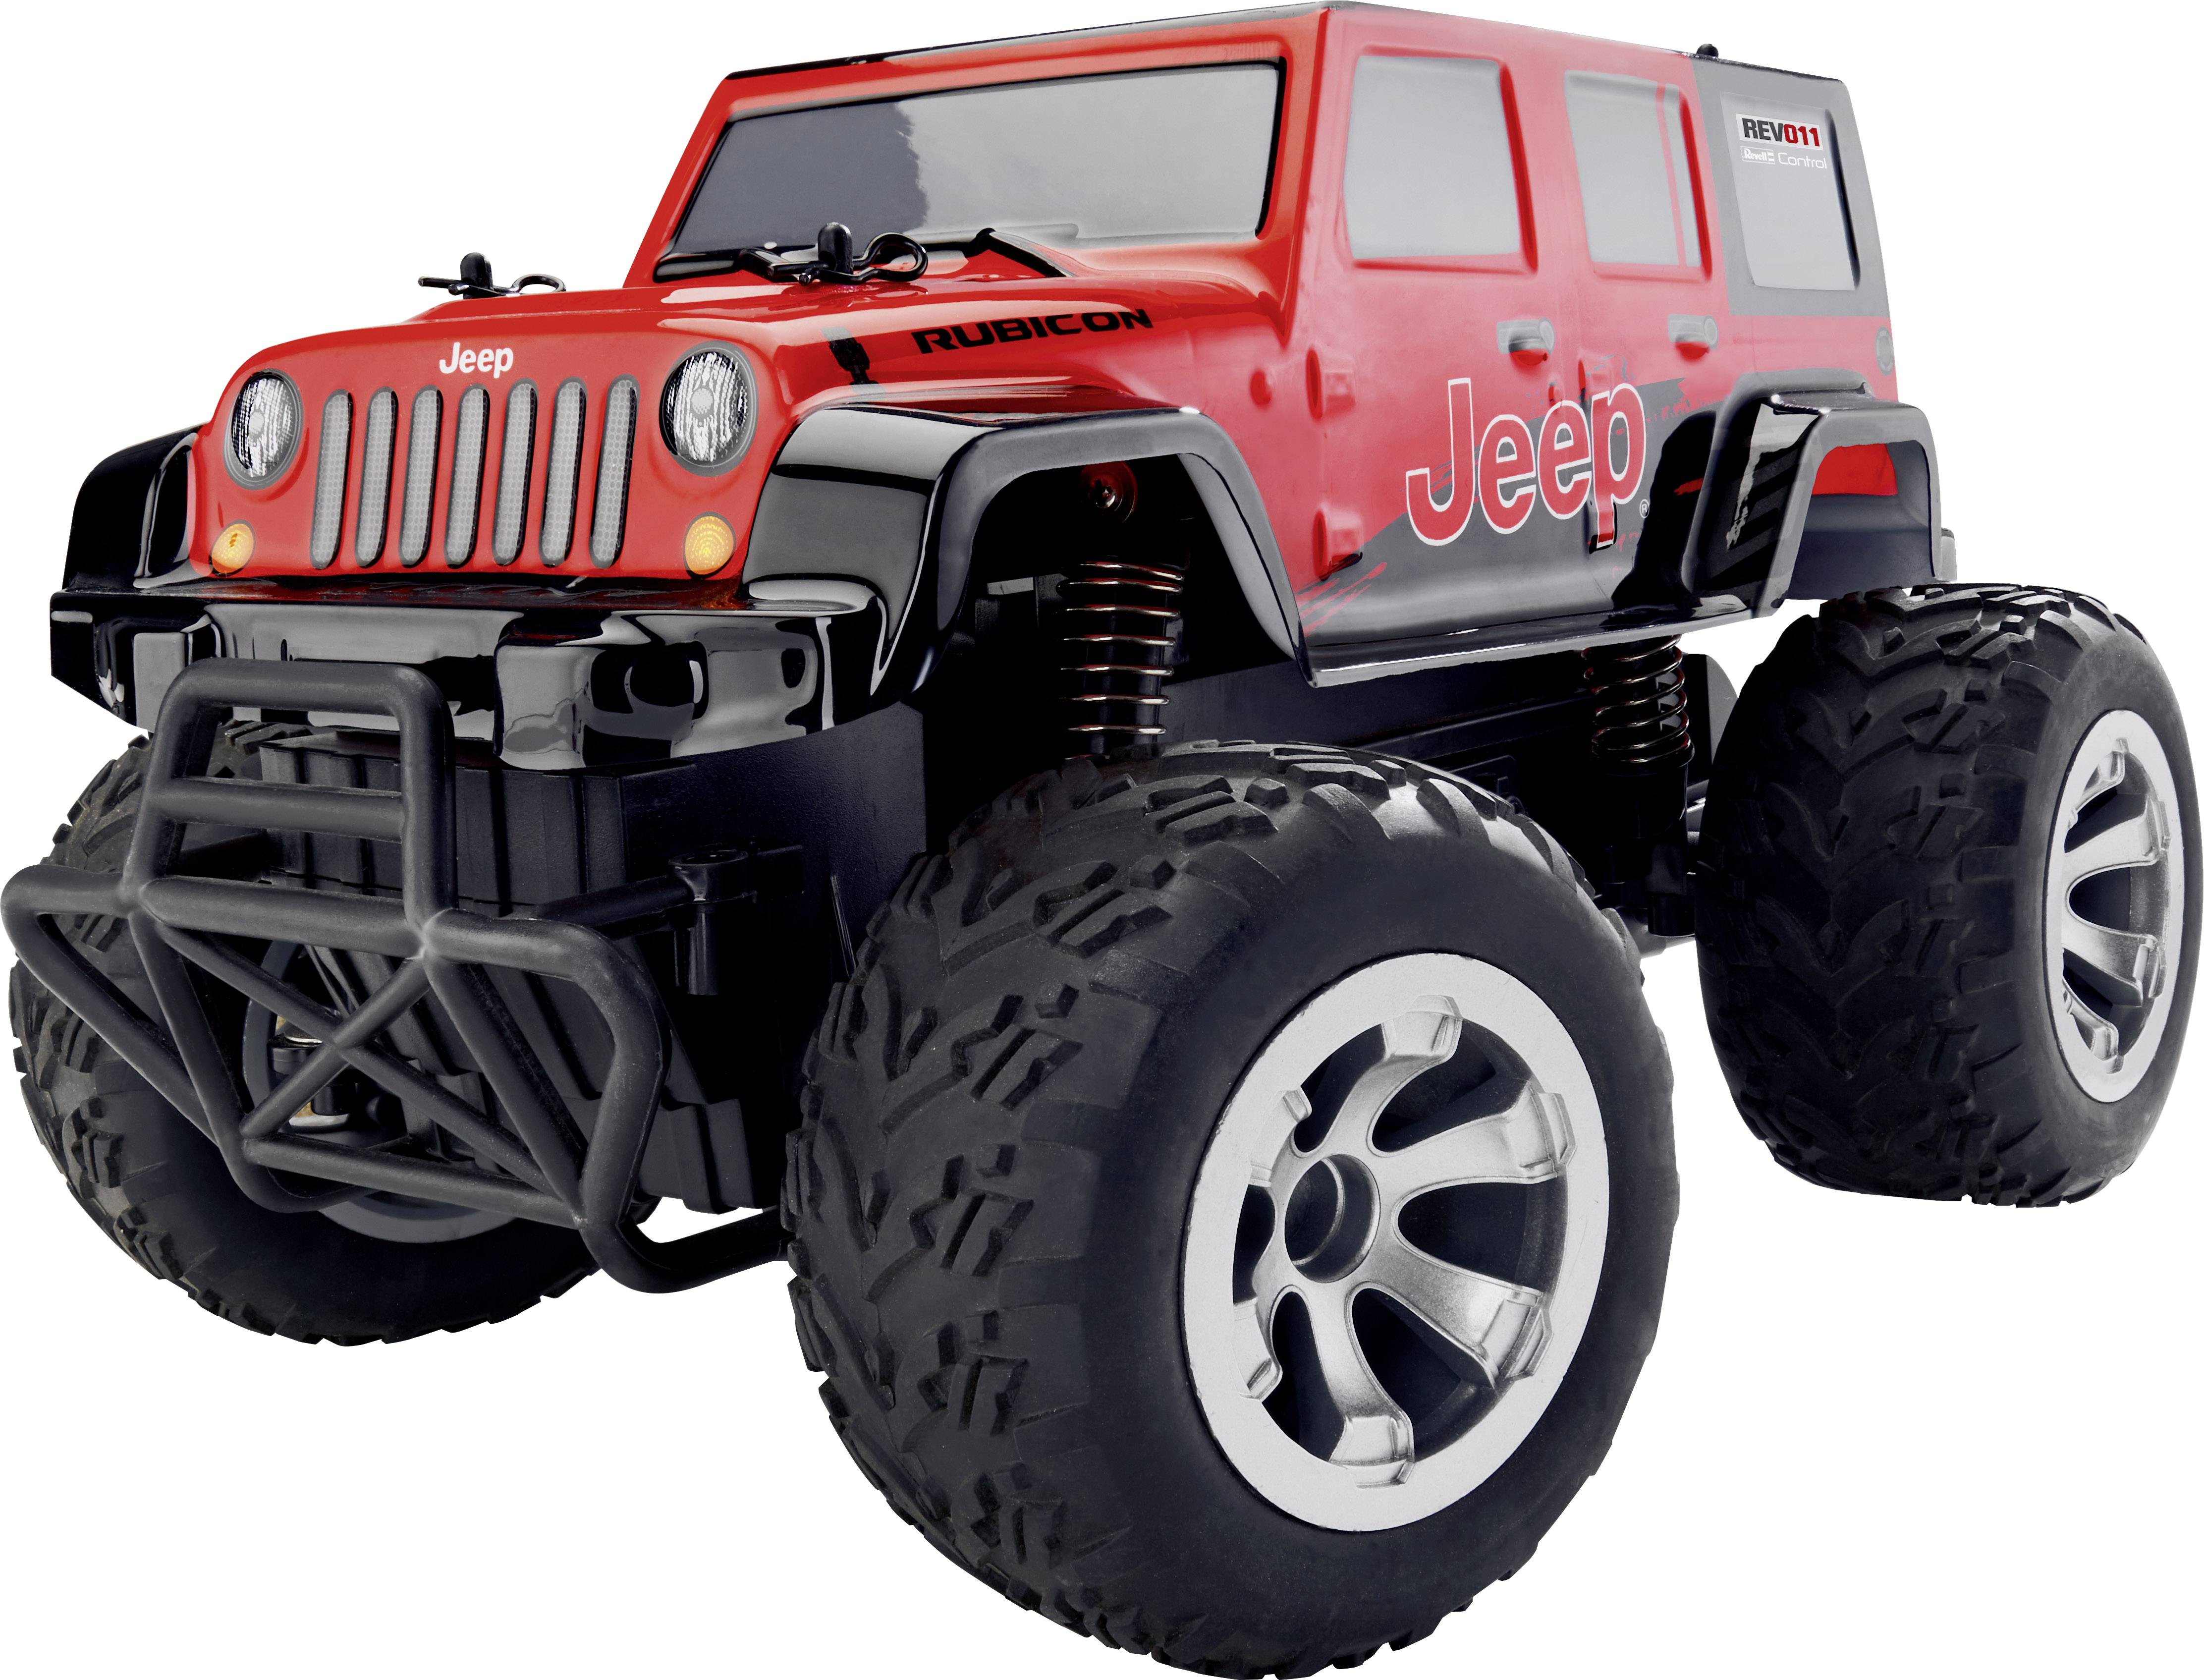 Revell Control 24464 Jeep® Wrangler Rubicon 1:18 RC model car for beginners  Electric ATV 